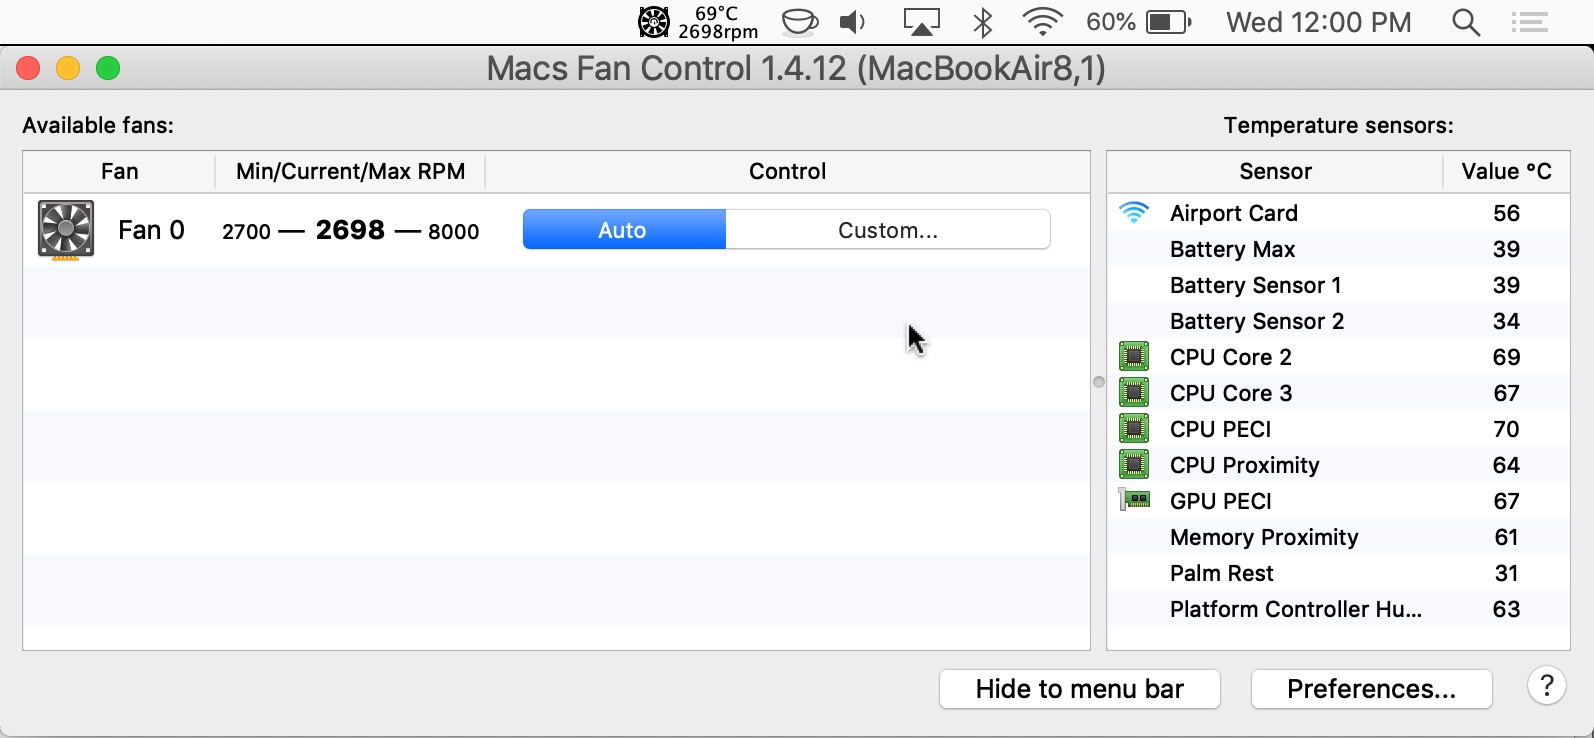 Macs Fan Control: What It Is And How It Works